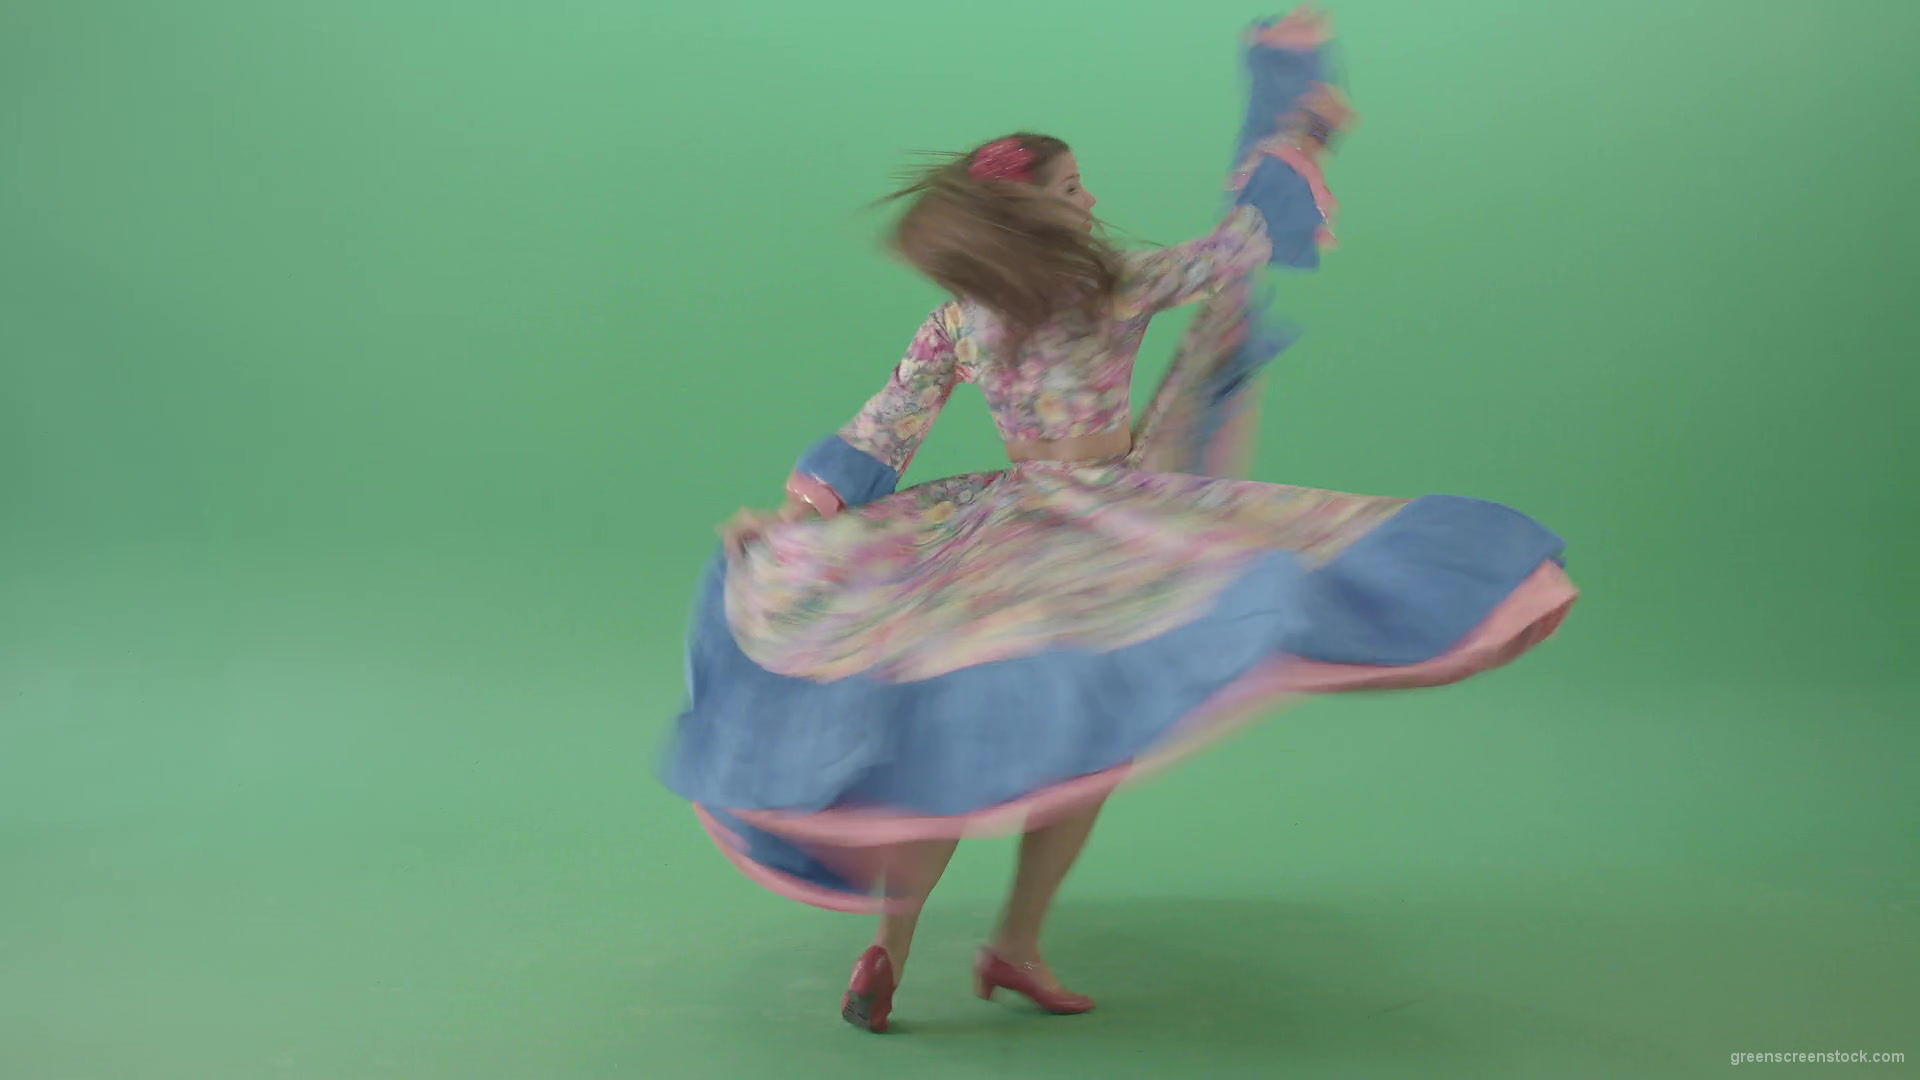 Balkan-Gipsy-Girl-spinning-and-dance-isolated-on-Green-Screen-4K-Video-Footage-1920_005 Green Screen Stock